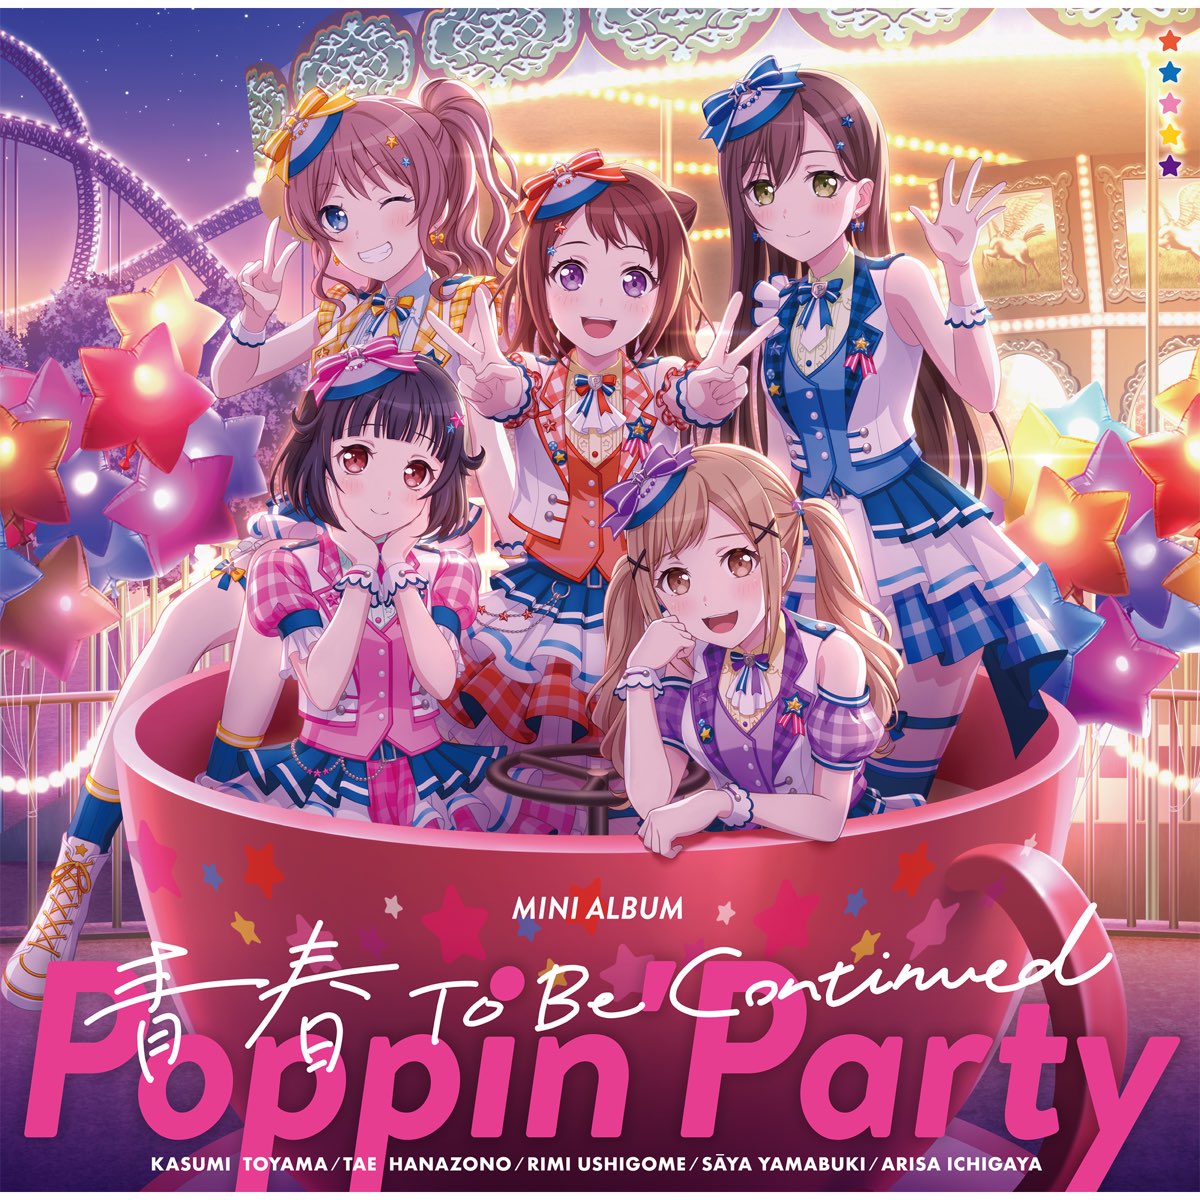 Youthful Days To Be Continued - EP by Poppin'Party on Apple Music